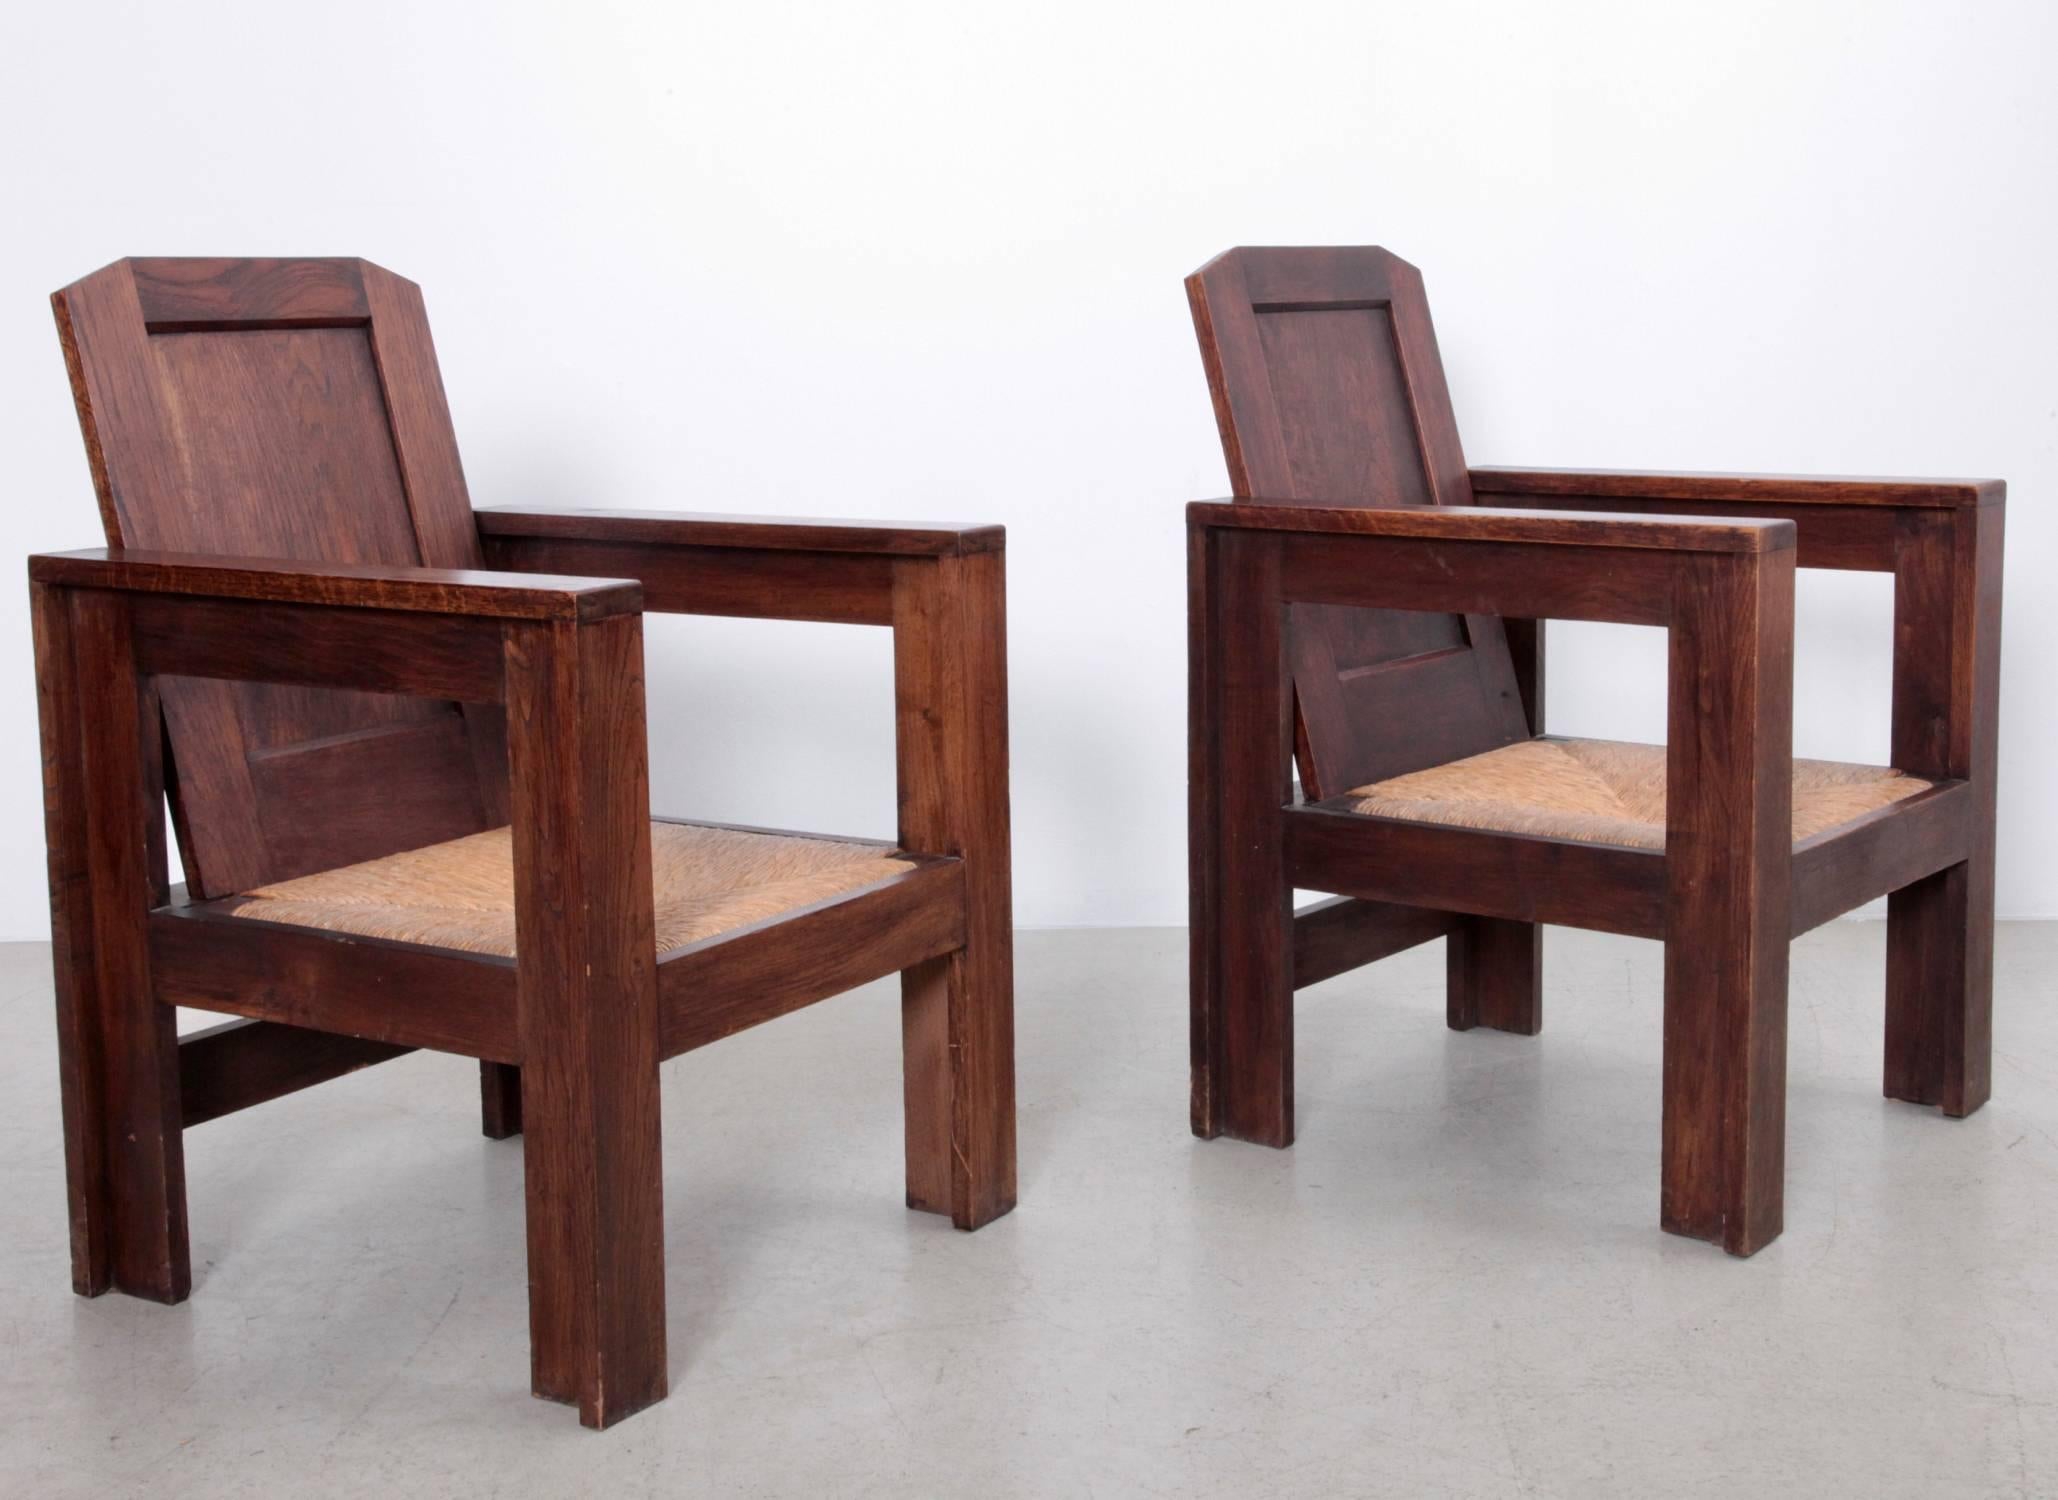 Rare excellent pair of Joseph Gavina lounge chairs in solid oak and grass webbing. Joseph Savina, (1901-1983), was a Breton woodworker, cabinet maker and sculptor who was a member of the art movement Seiz Breur. He collaborated with Le Corbusier on